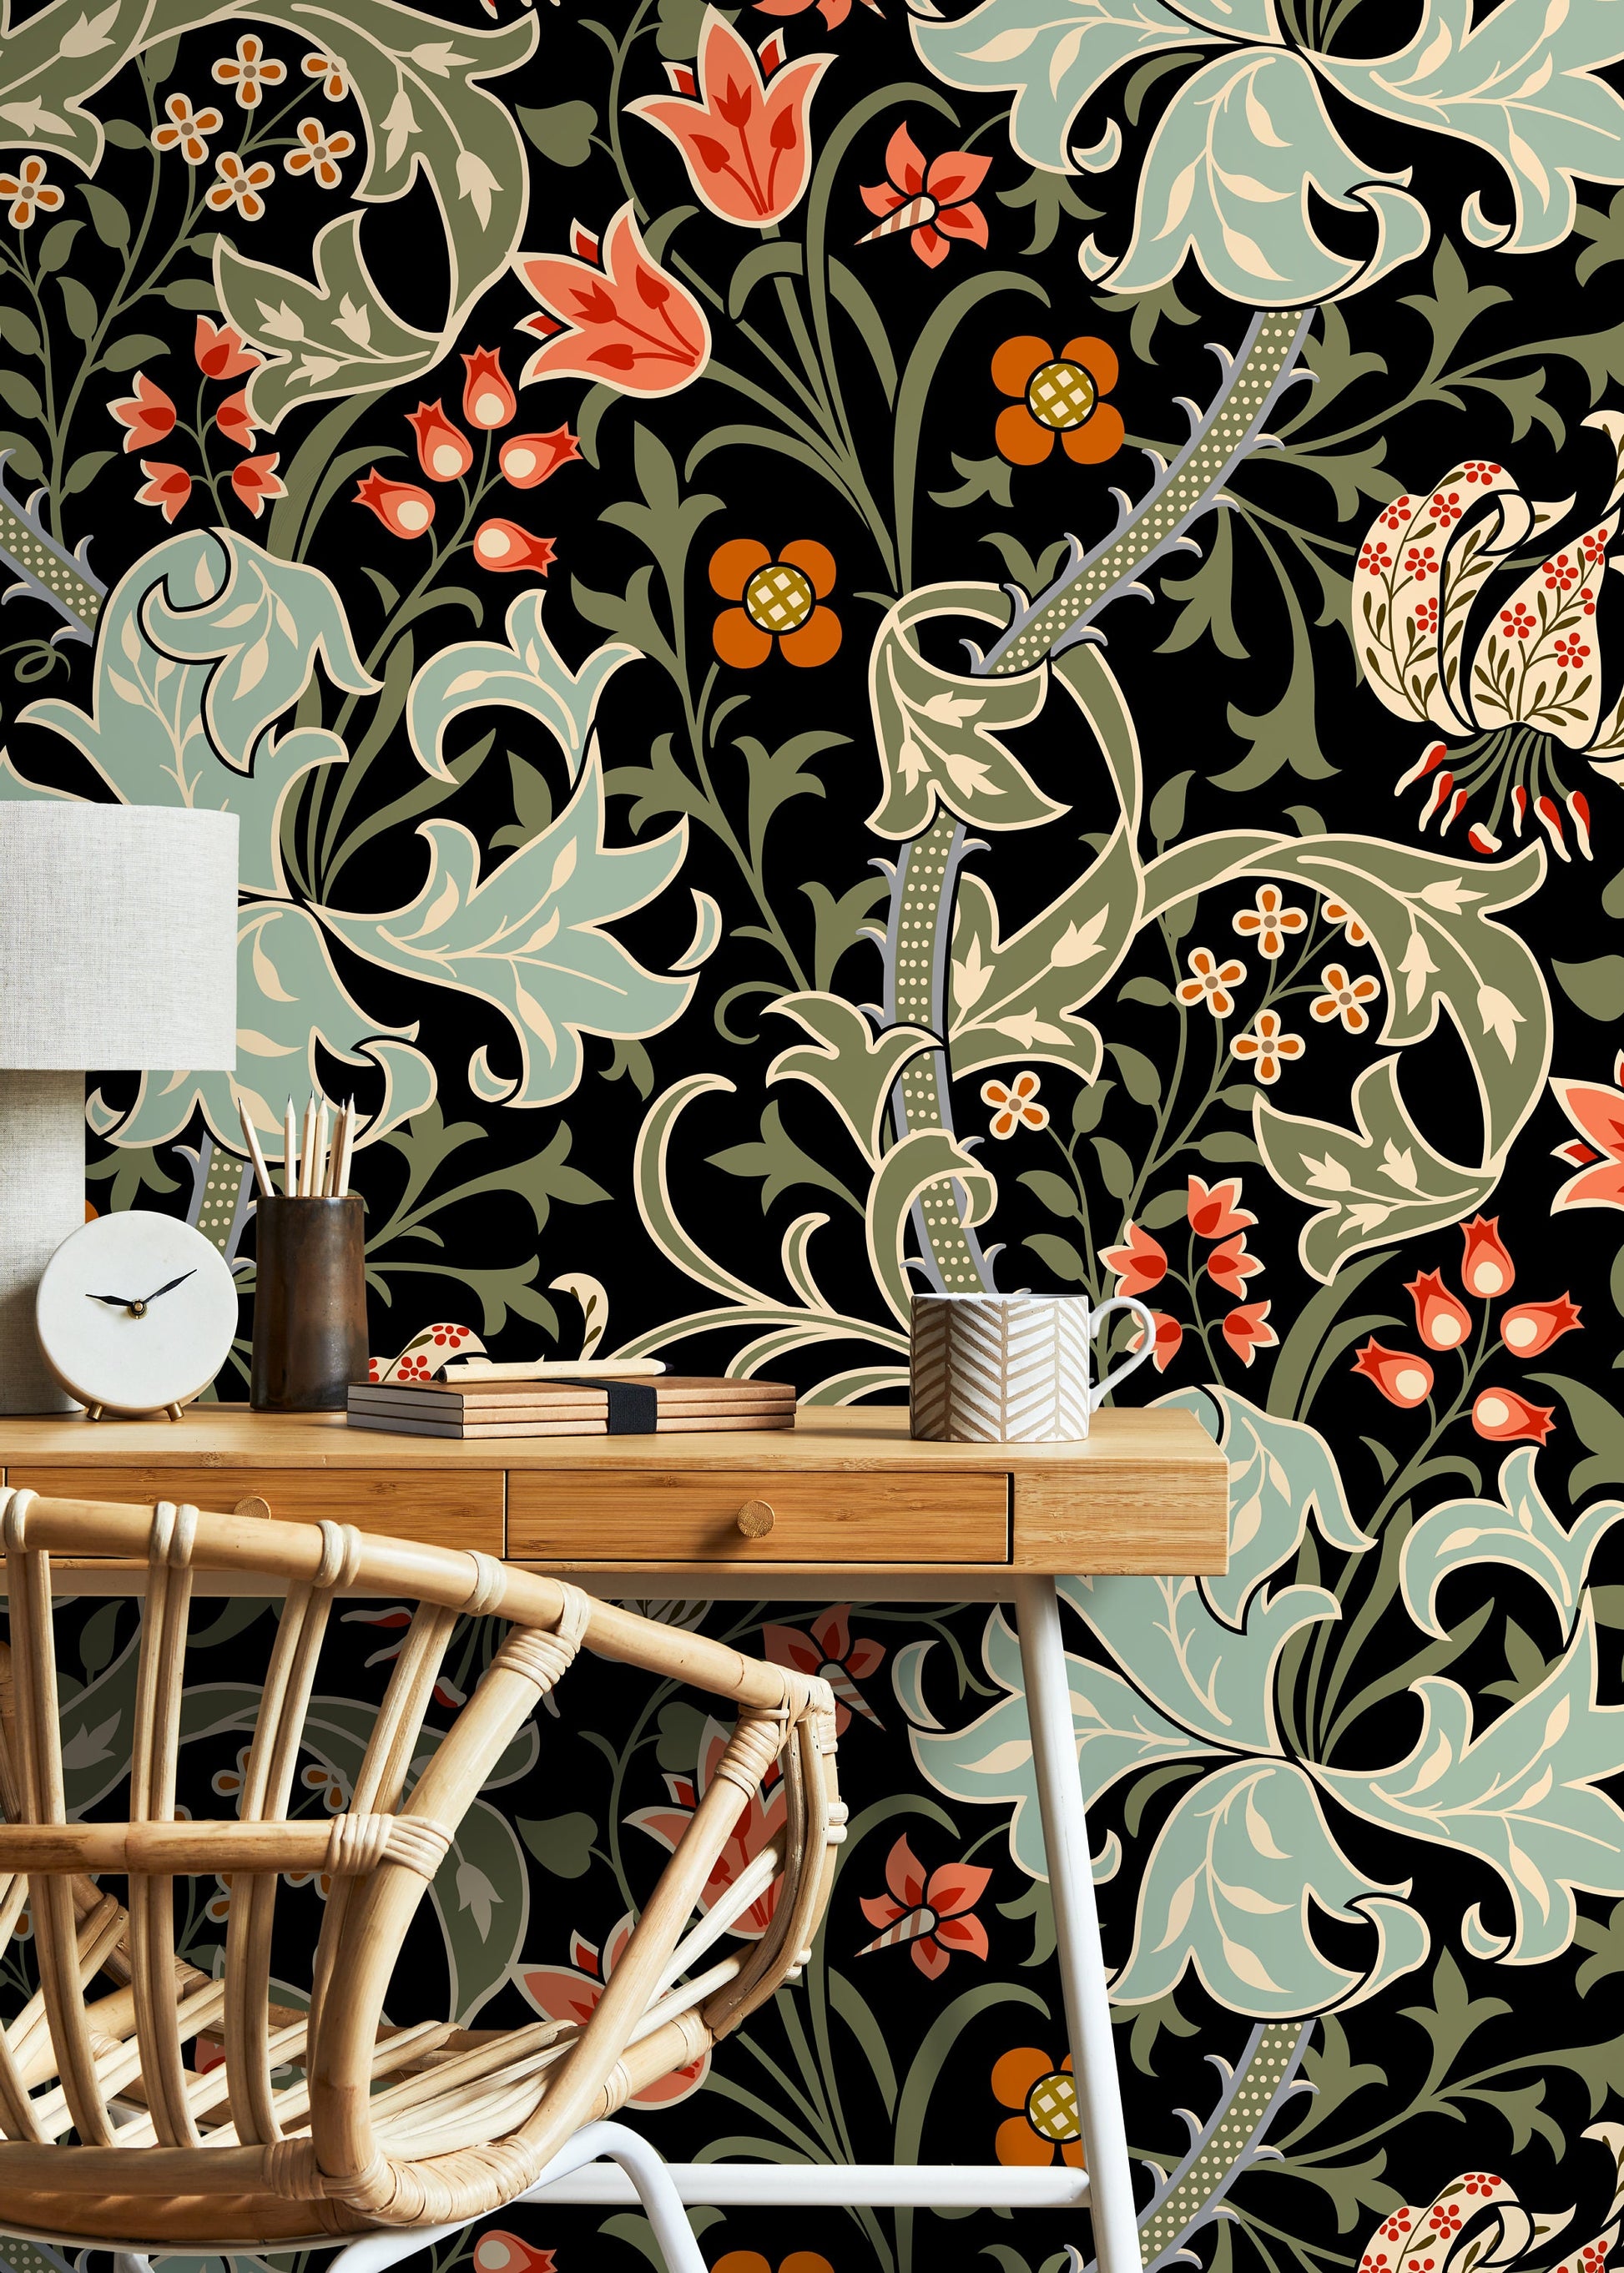 Large Floral Vintage Wallpaper / Peel and Stick Wallpaper Removable Wallpaper Home Decor Wall Art Wall Decor Room Decor - D006